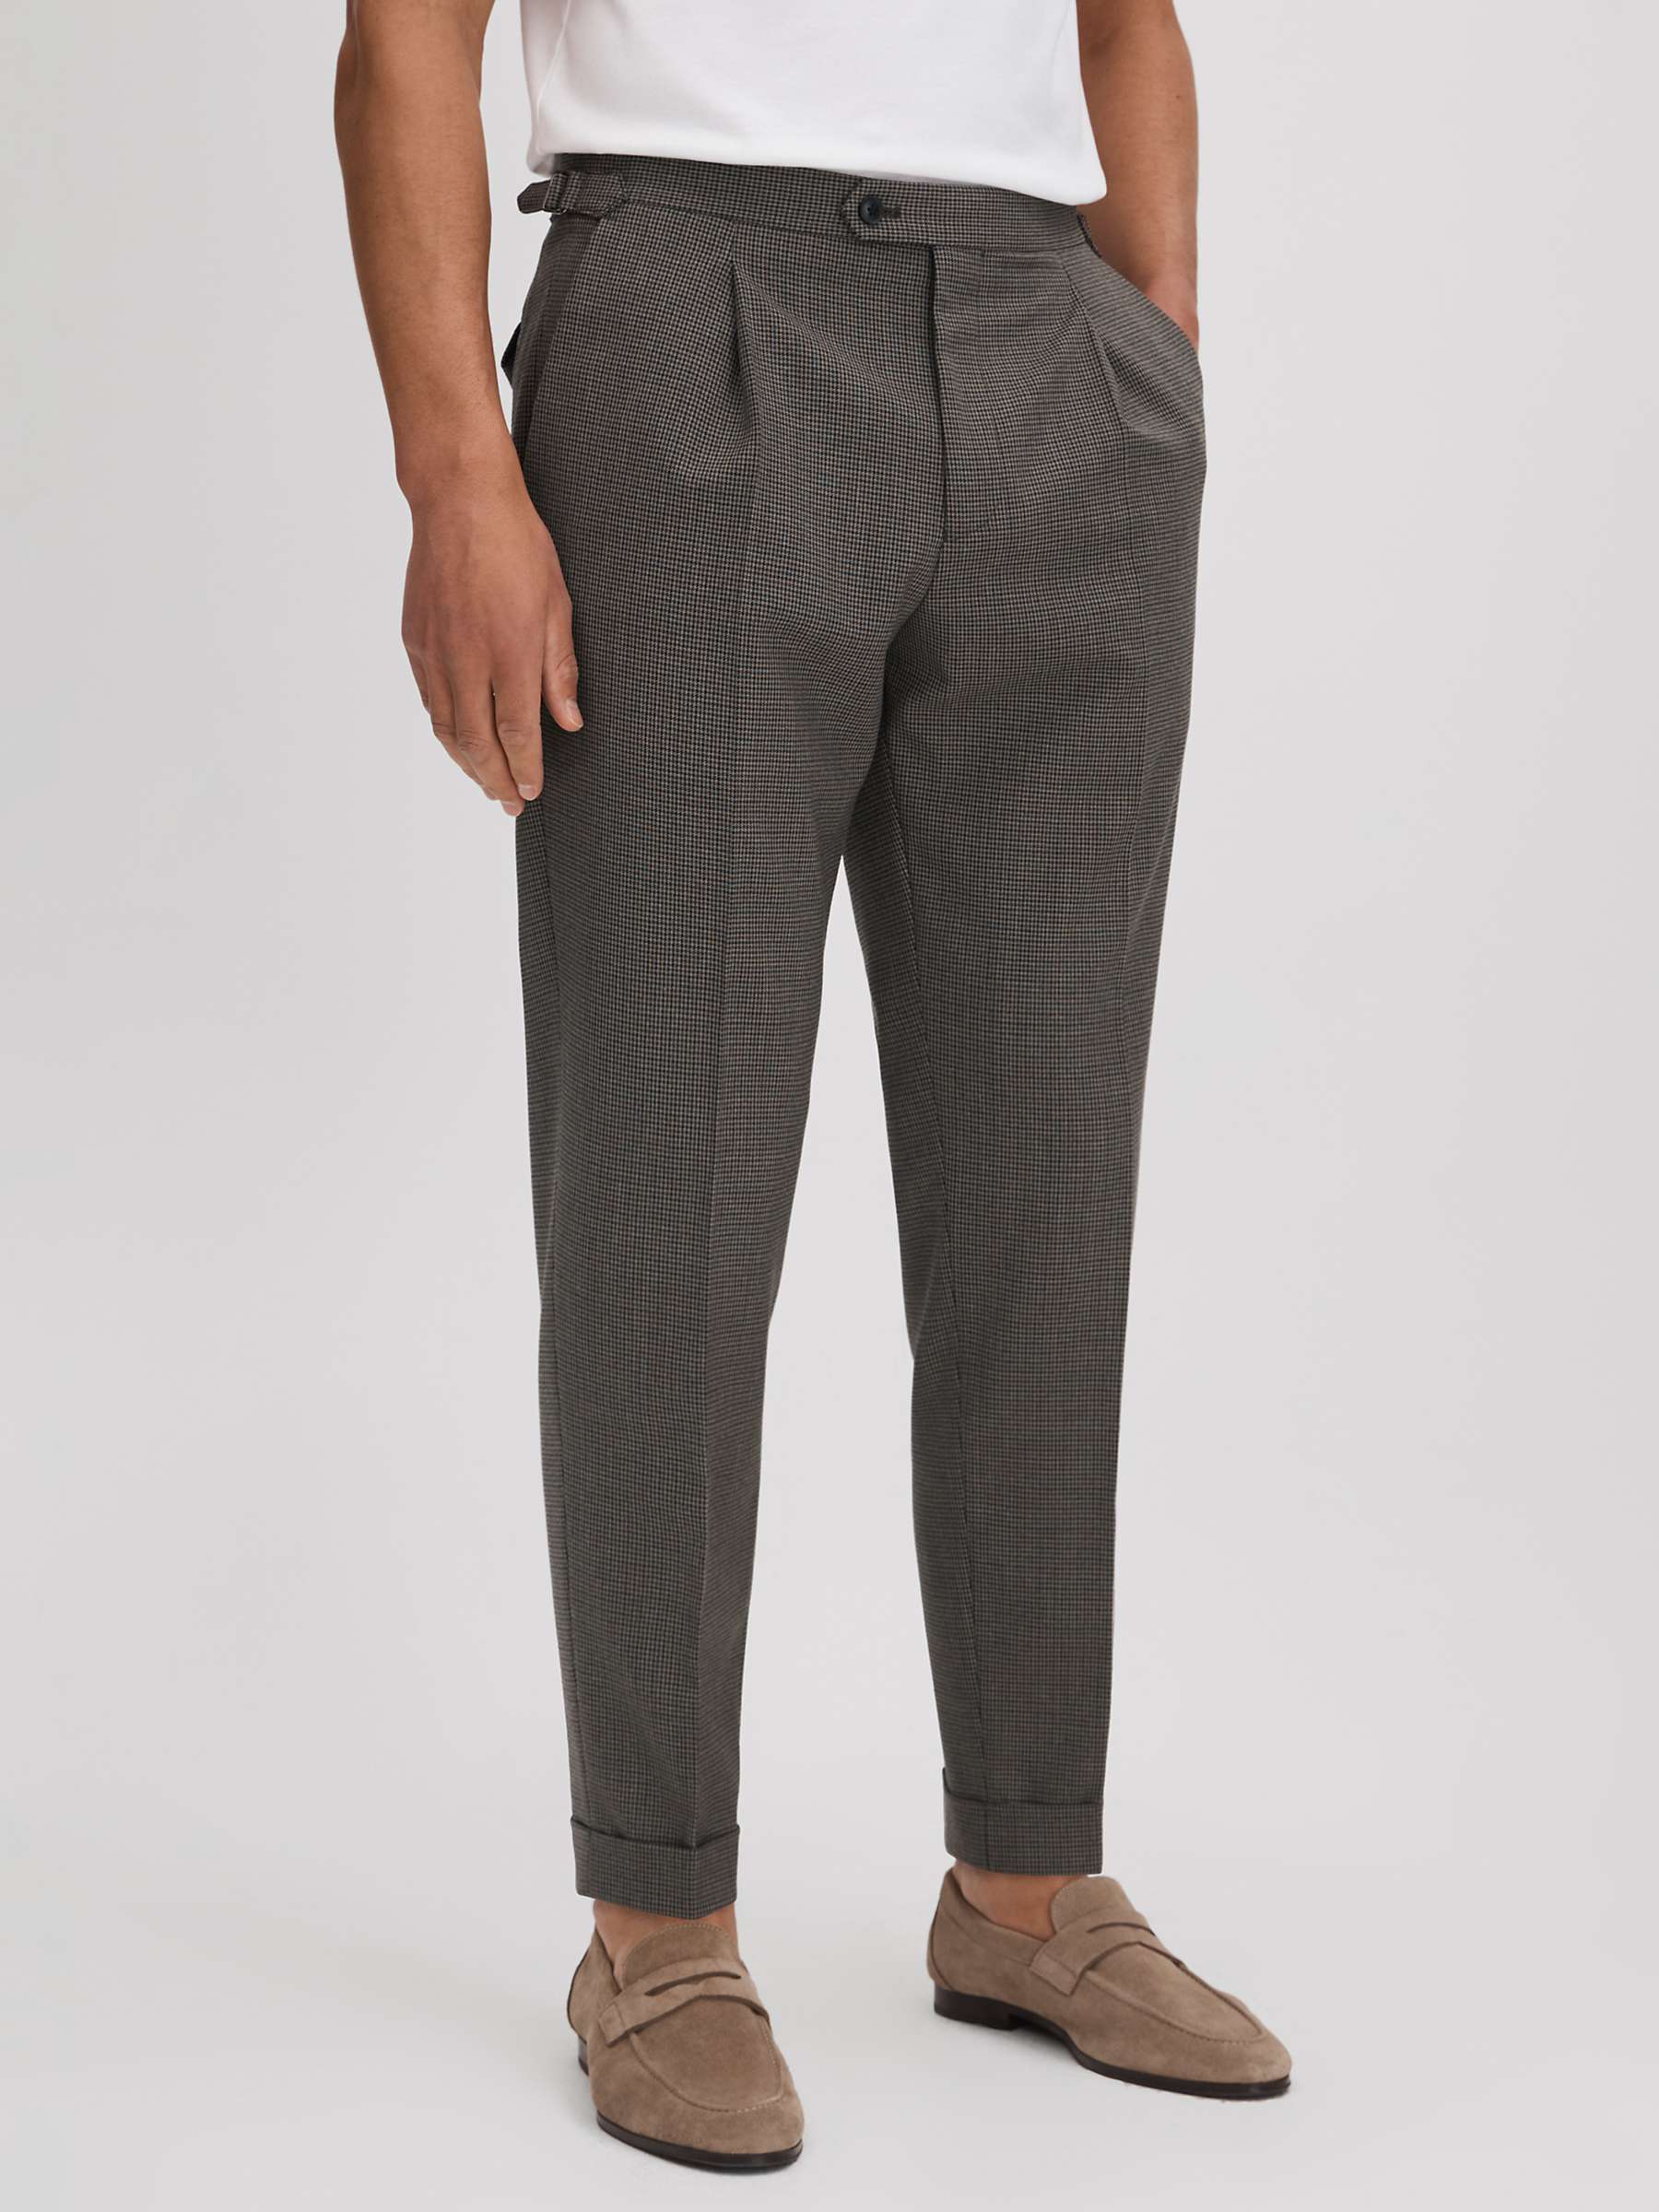 Buy Reiss Rumble Puppytooth Wool Blend Trousers, Brown/Black Online at johnlewis.com